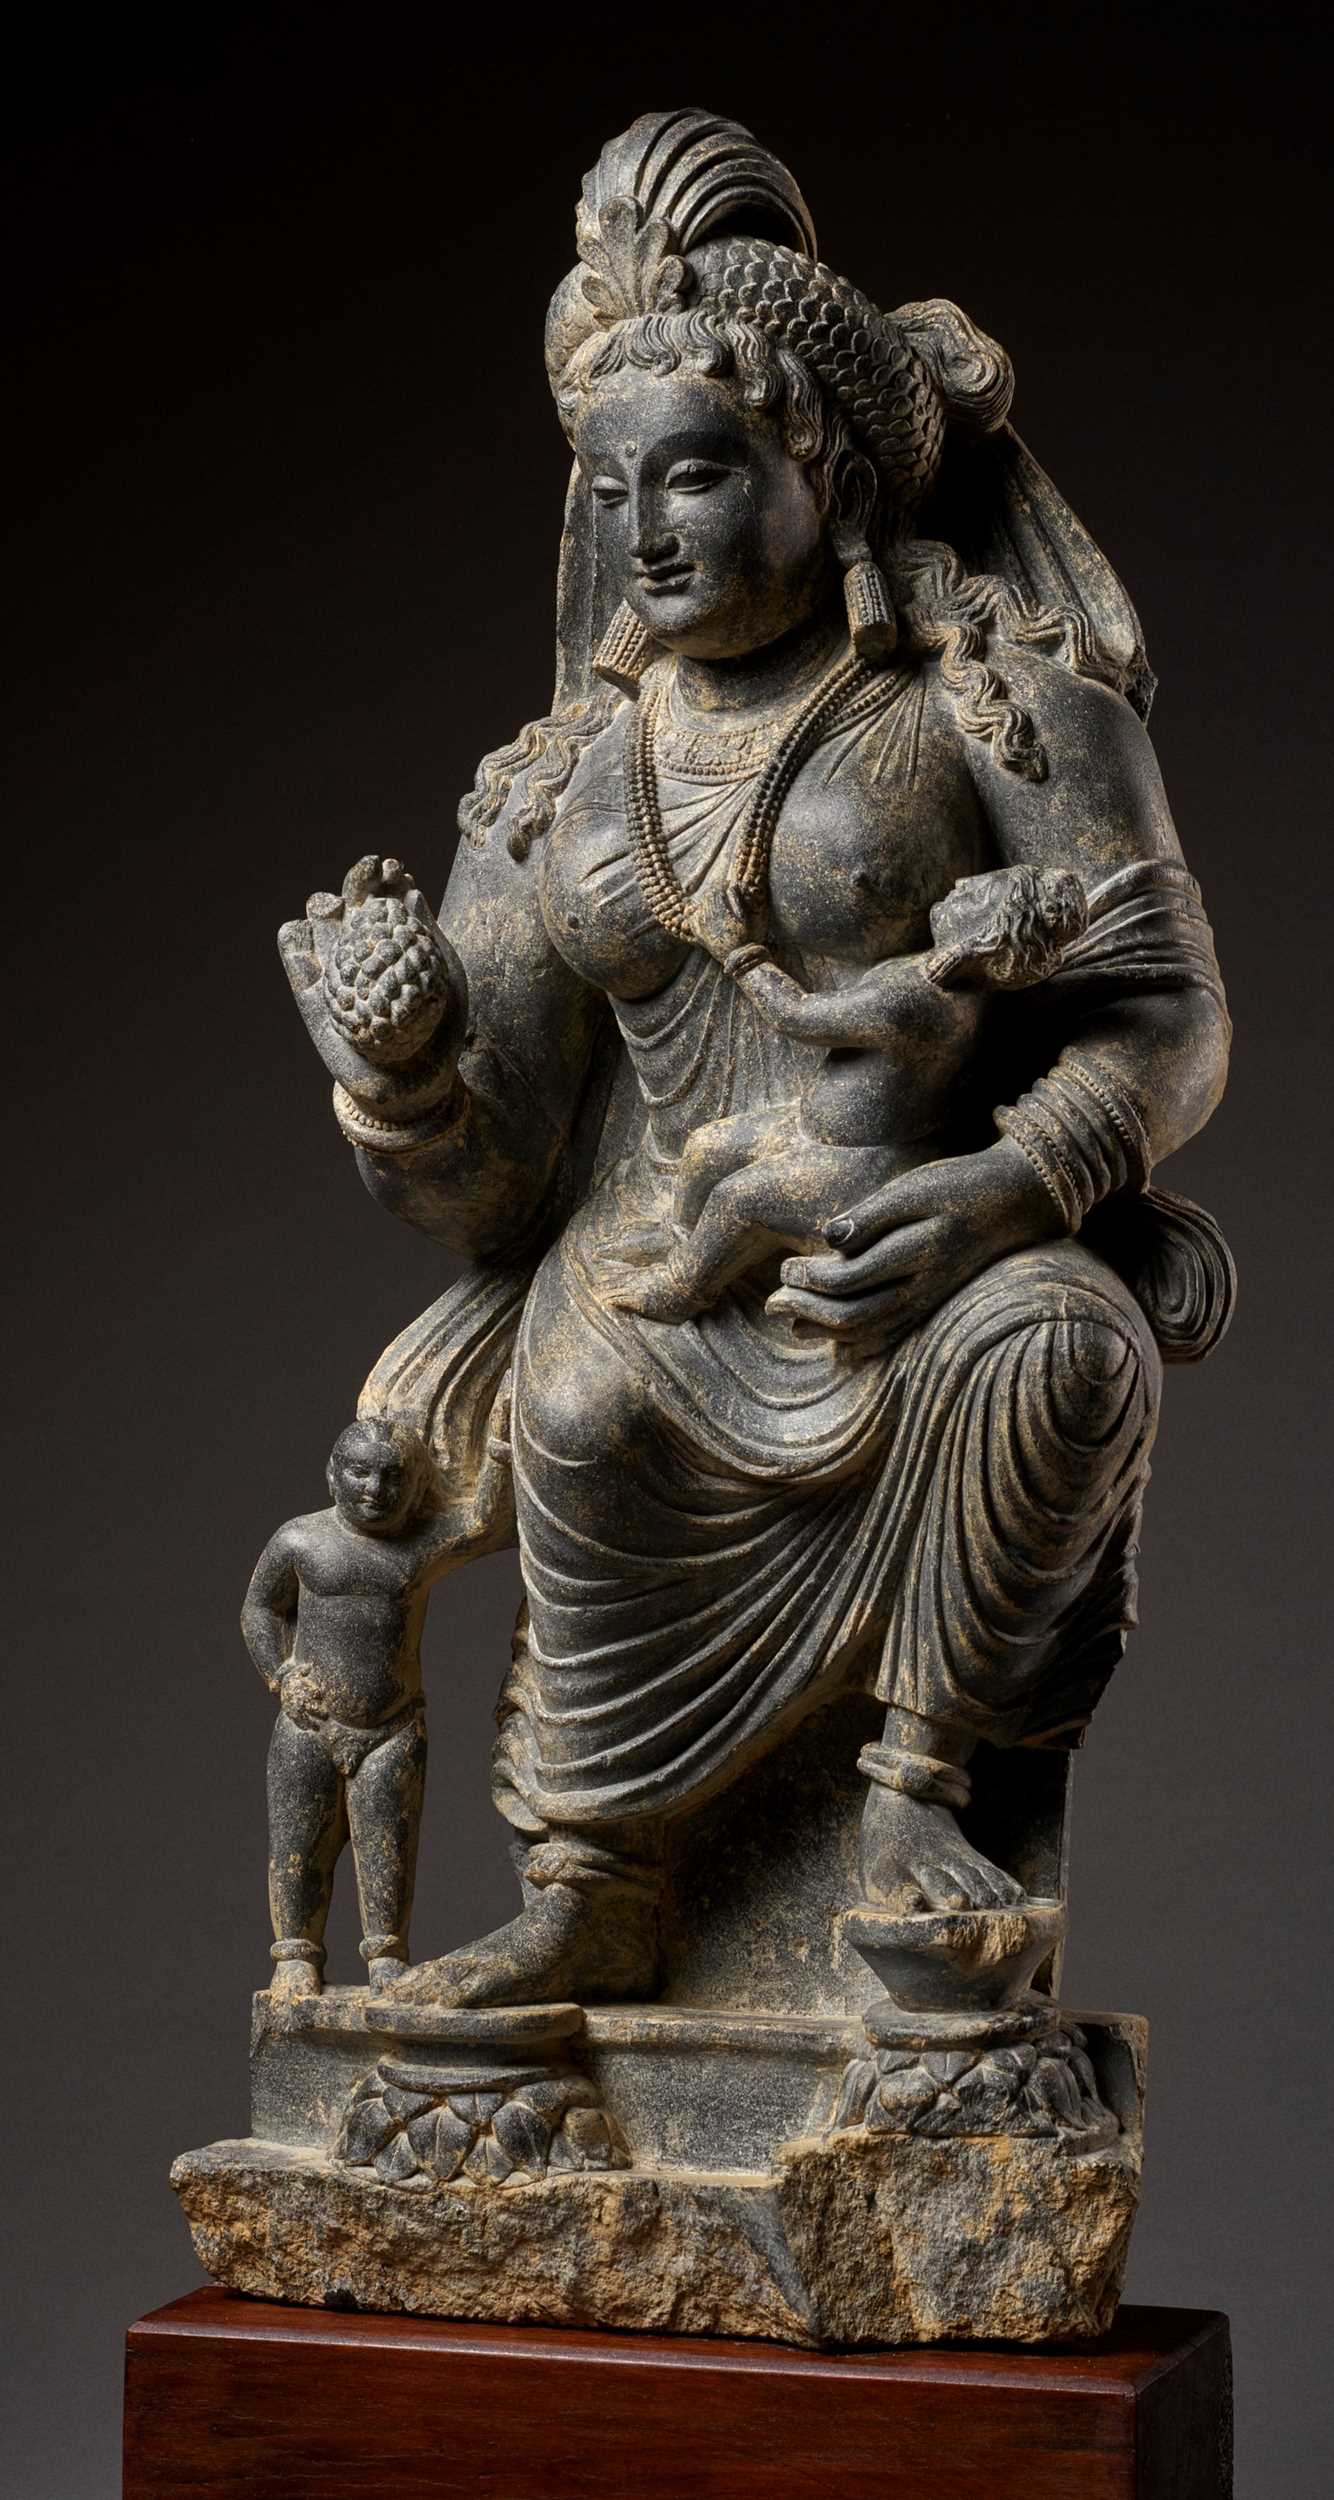 Lot 686 - A HIGHLY IMPORTANT AND LARGE SCHIST STATUE OF HARITI, GANDHARA, 2ND-3RD CENTURY